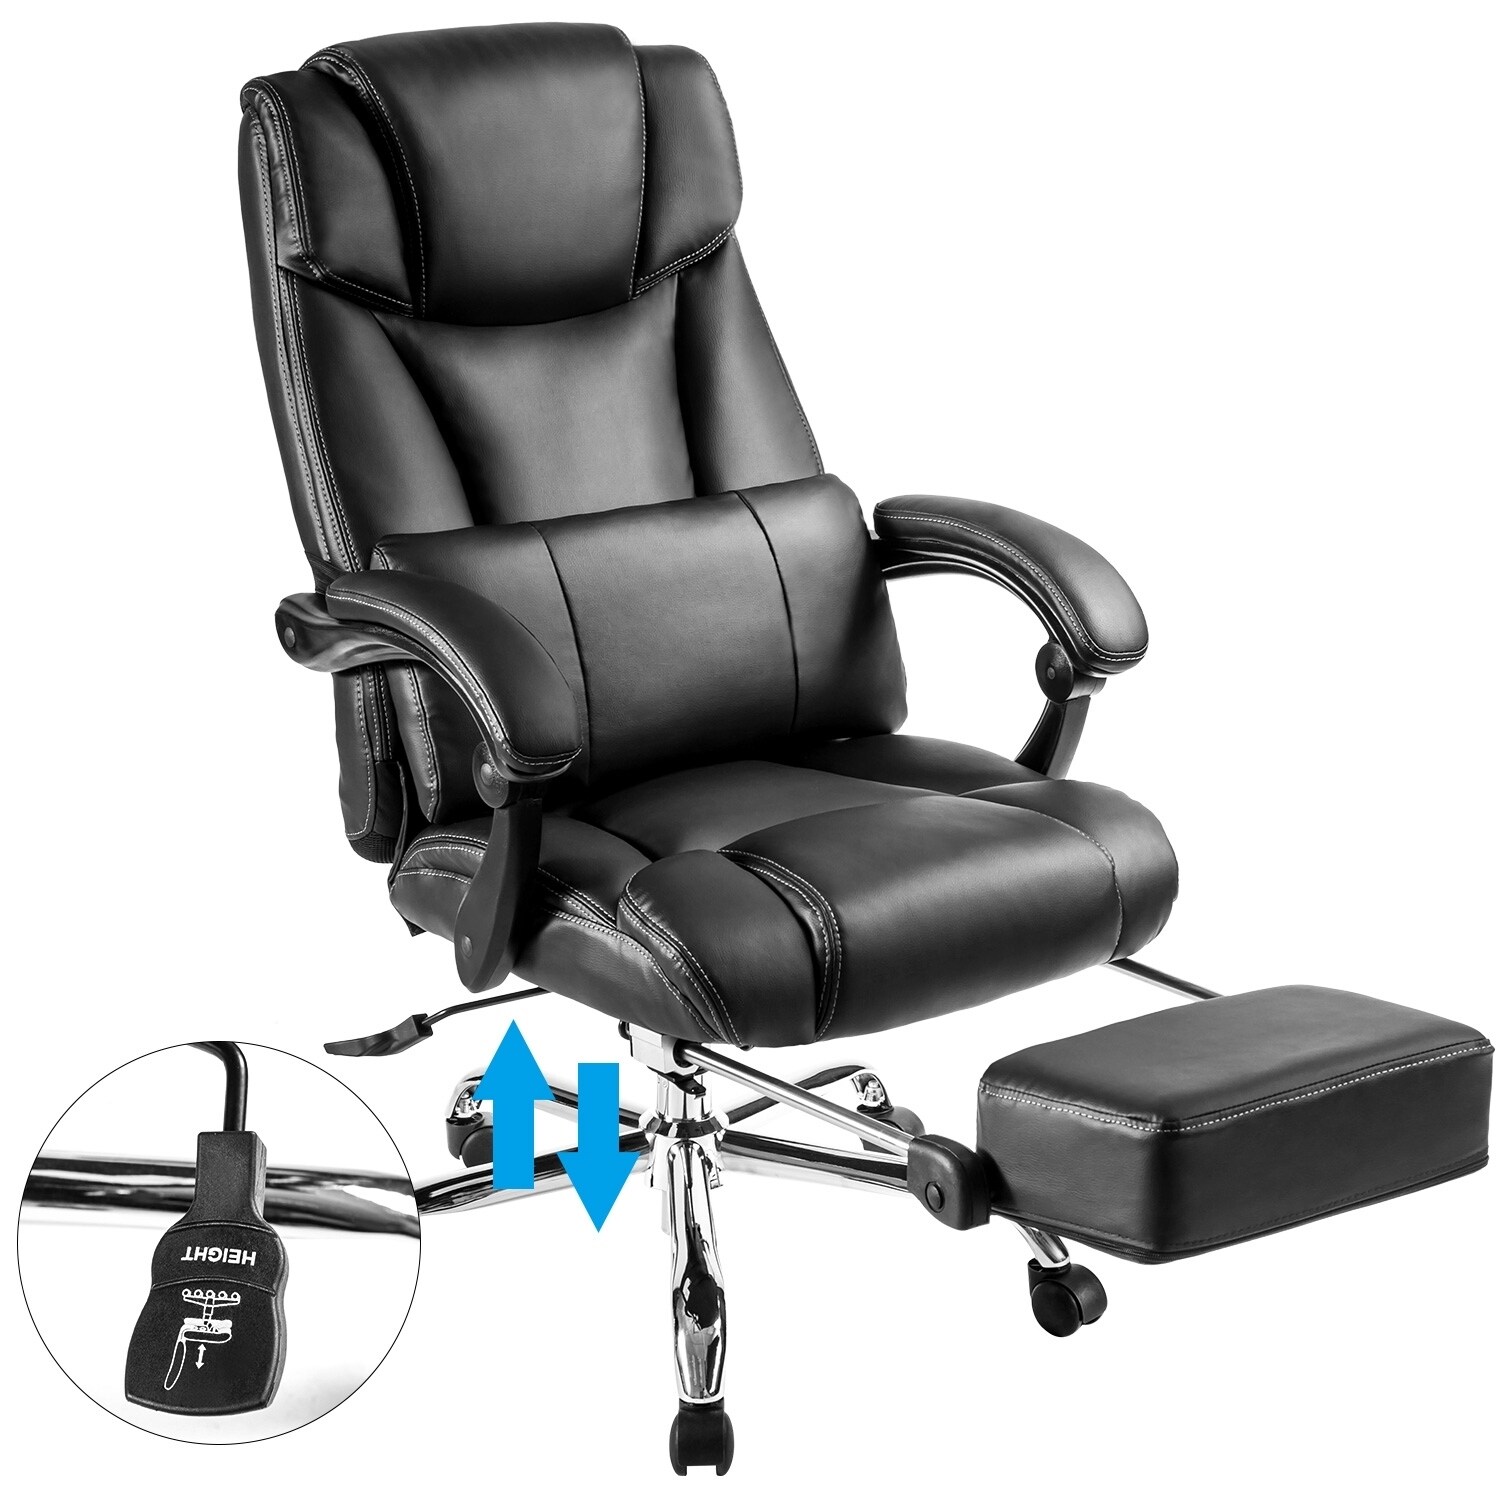 https://ak1.ostkcdn.com/images/products/is/images/direct/5e0d07b21b93869dc3523de836317797e63ca169/Office-Chair---High-Quality-PU-Leather-Double-Padded-Support-Cushion-and-Footrest.jpg